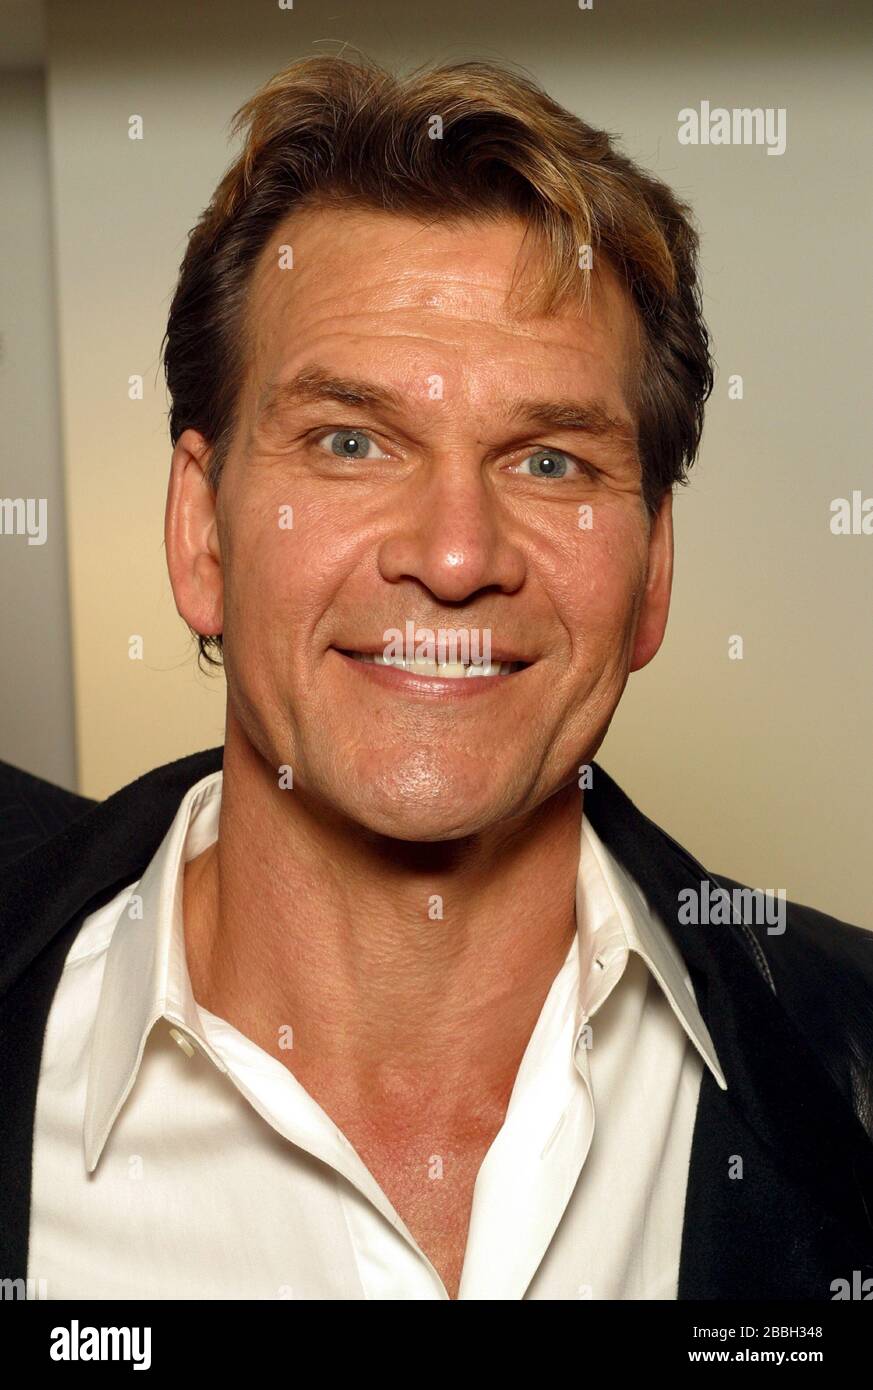 Patrick Swayze appearing at the University of Pennsylvania promoting  his new film One Last Dance.  April 7, 2003.  Credit:  Scott Weiner / MediaPunch Stock Photo